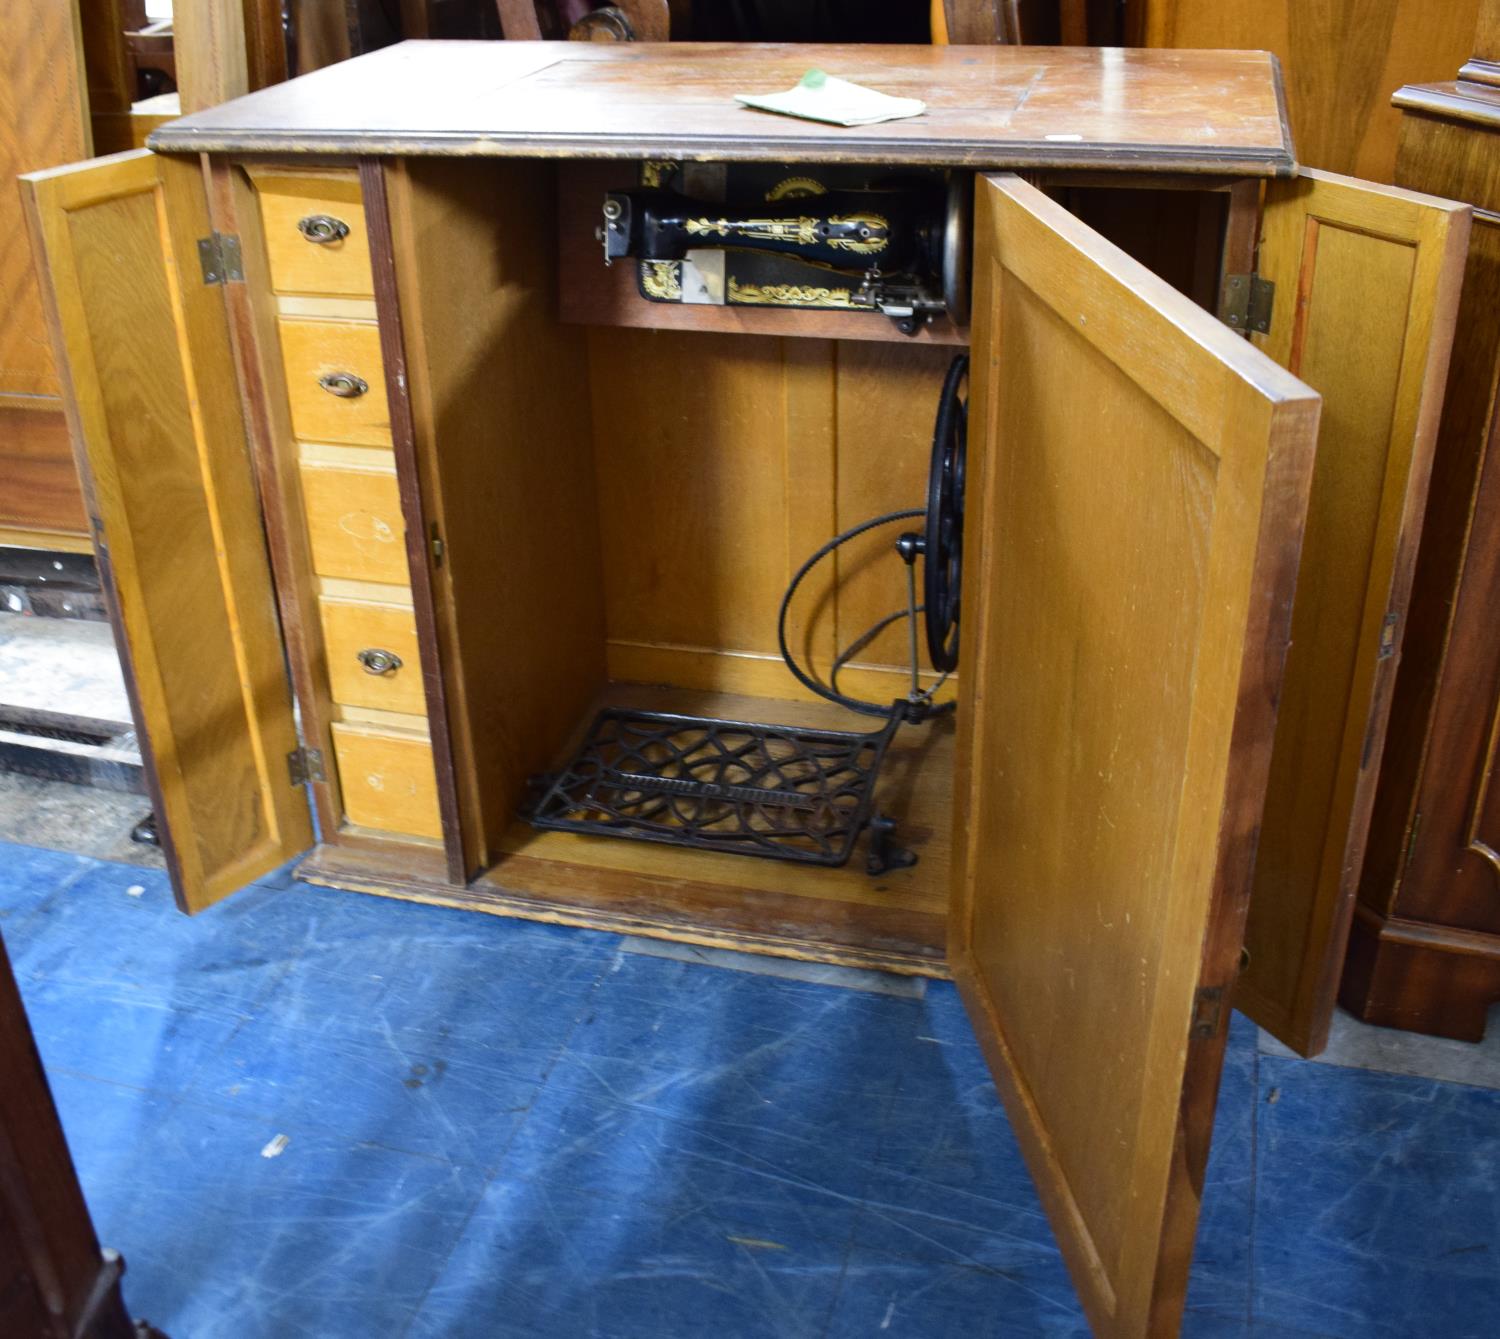 A Cabinet Containing Treadle Frister and Rossmann Sewing Machine, Locked and No Key, 90cm Wide - Image 2 of 3